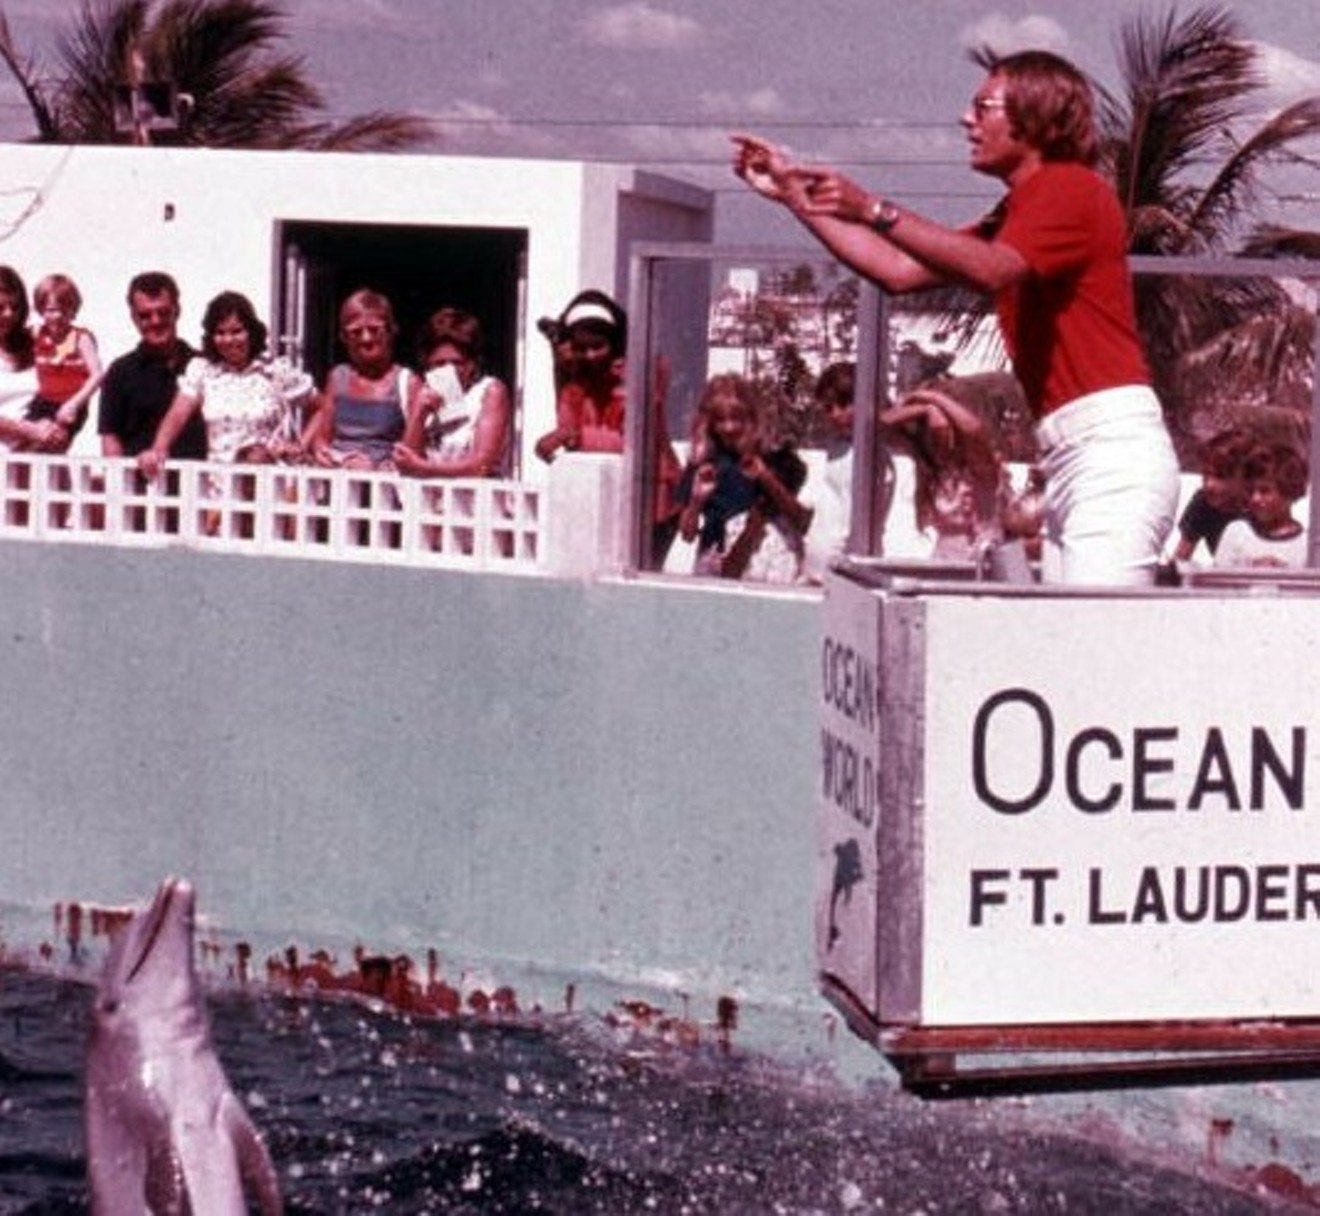 Before Russ Rector became a pioneer of the anti-captivity movement, he was a dolphin trainer at Ocean World.